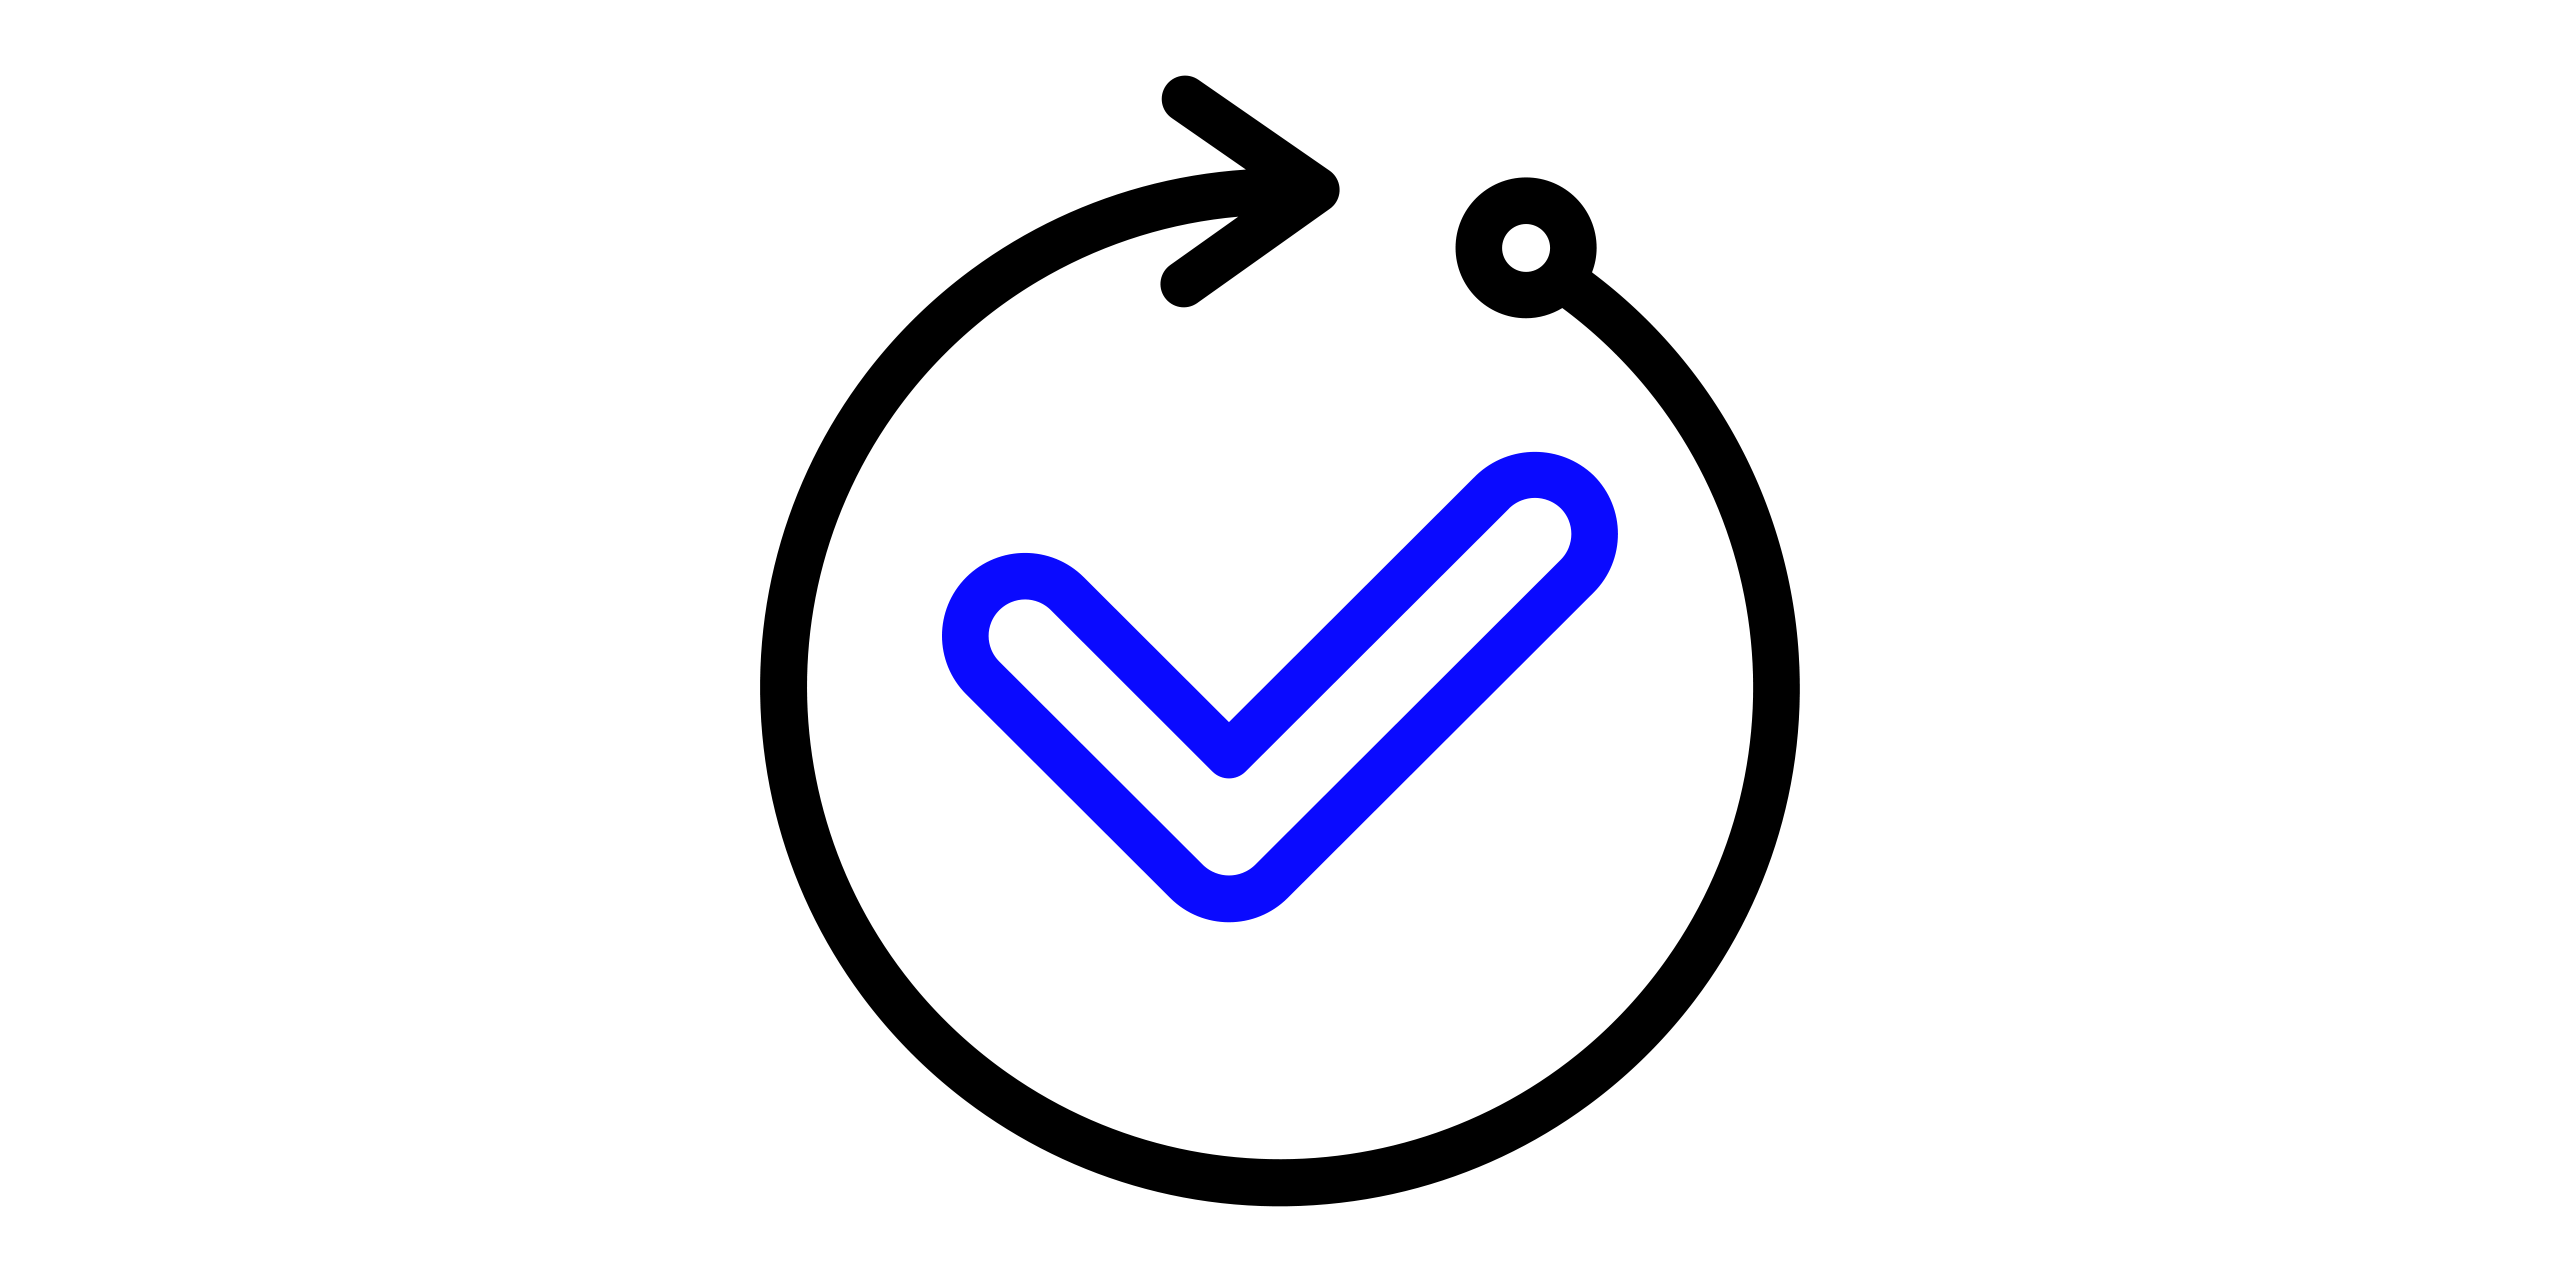 An icon of an arrow making a near complete circle around a checkmark